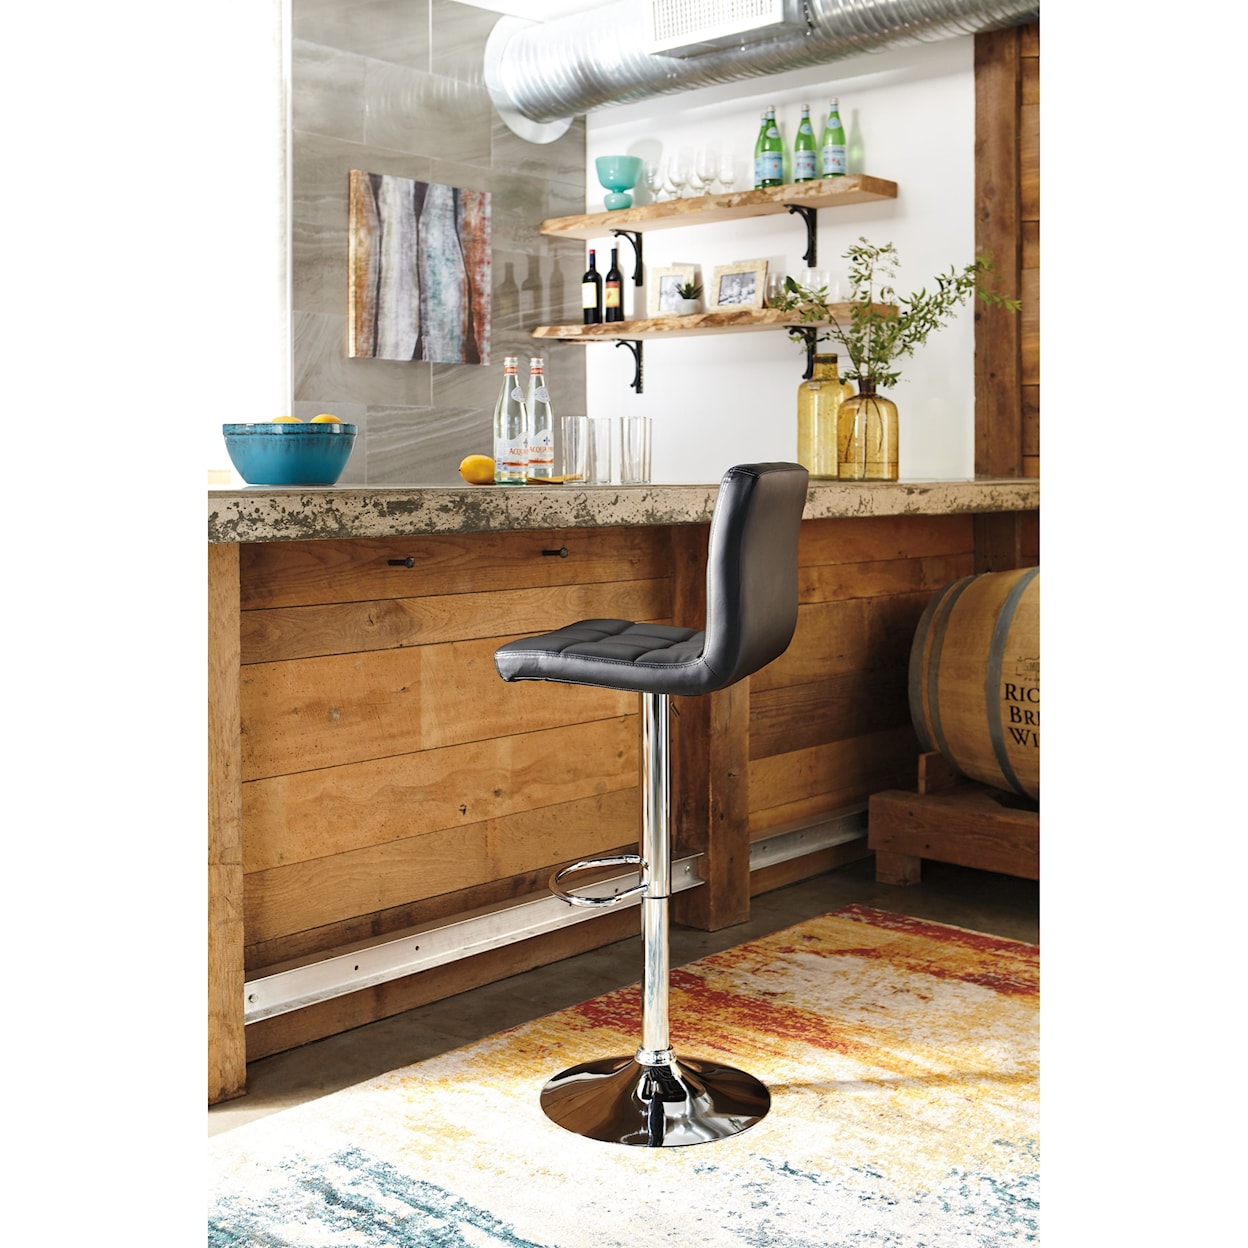 Signature Design by Ashley Bellatier Tall Upholstered Swivel Barstool